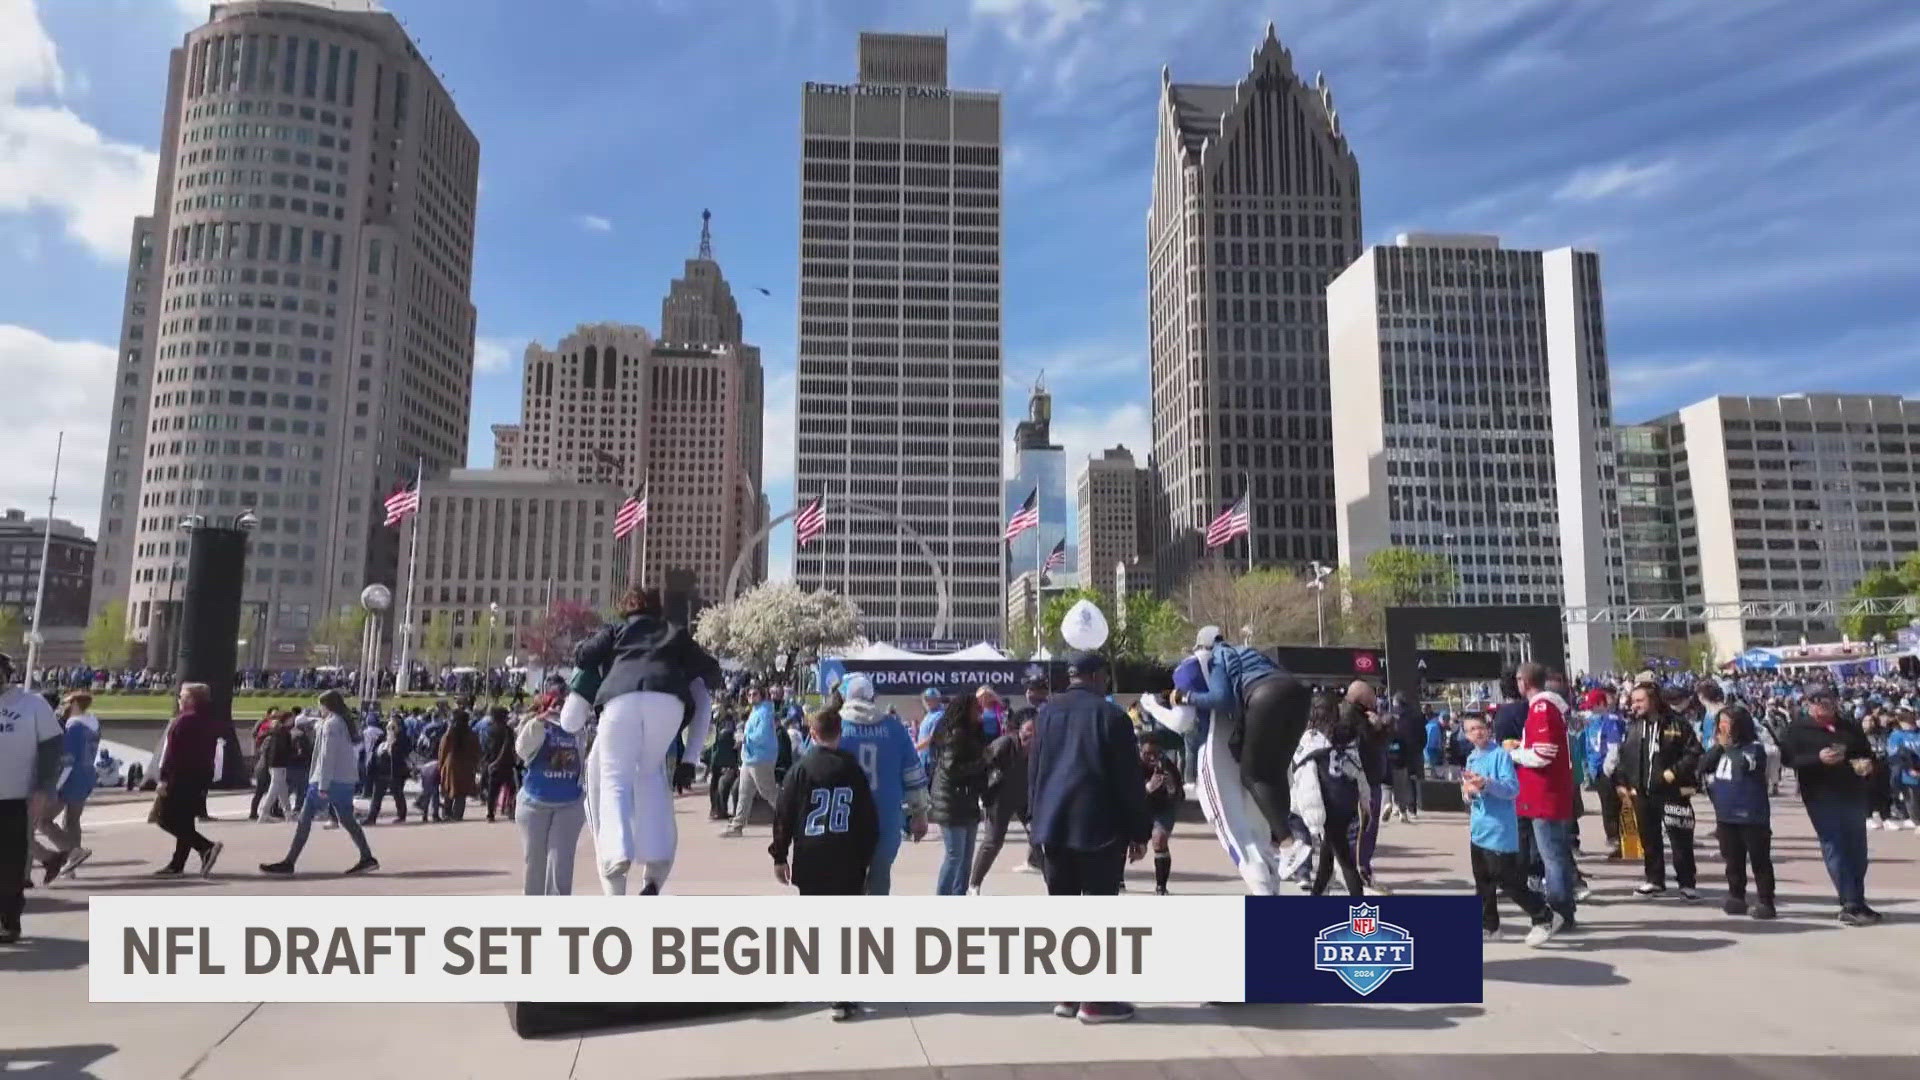 It's a historic day for Michigan. For the very first time, the NFL draft is happening in downtown Detroit.